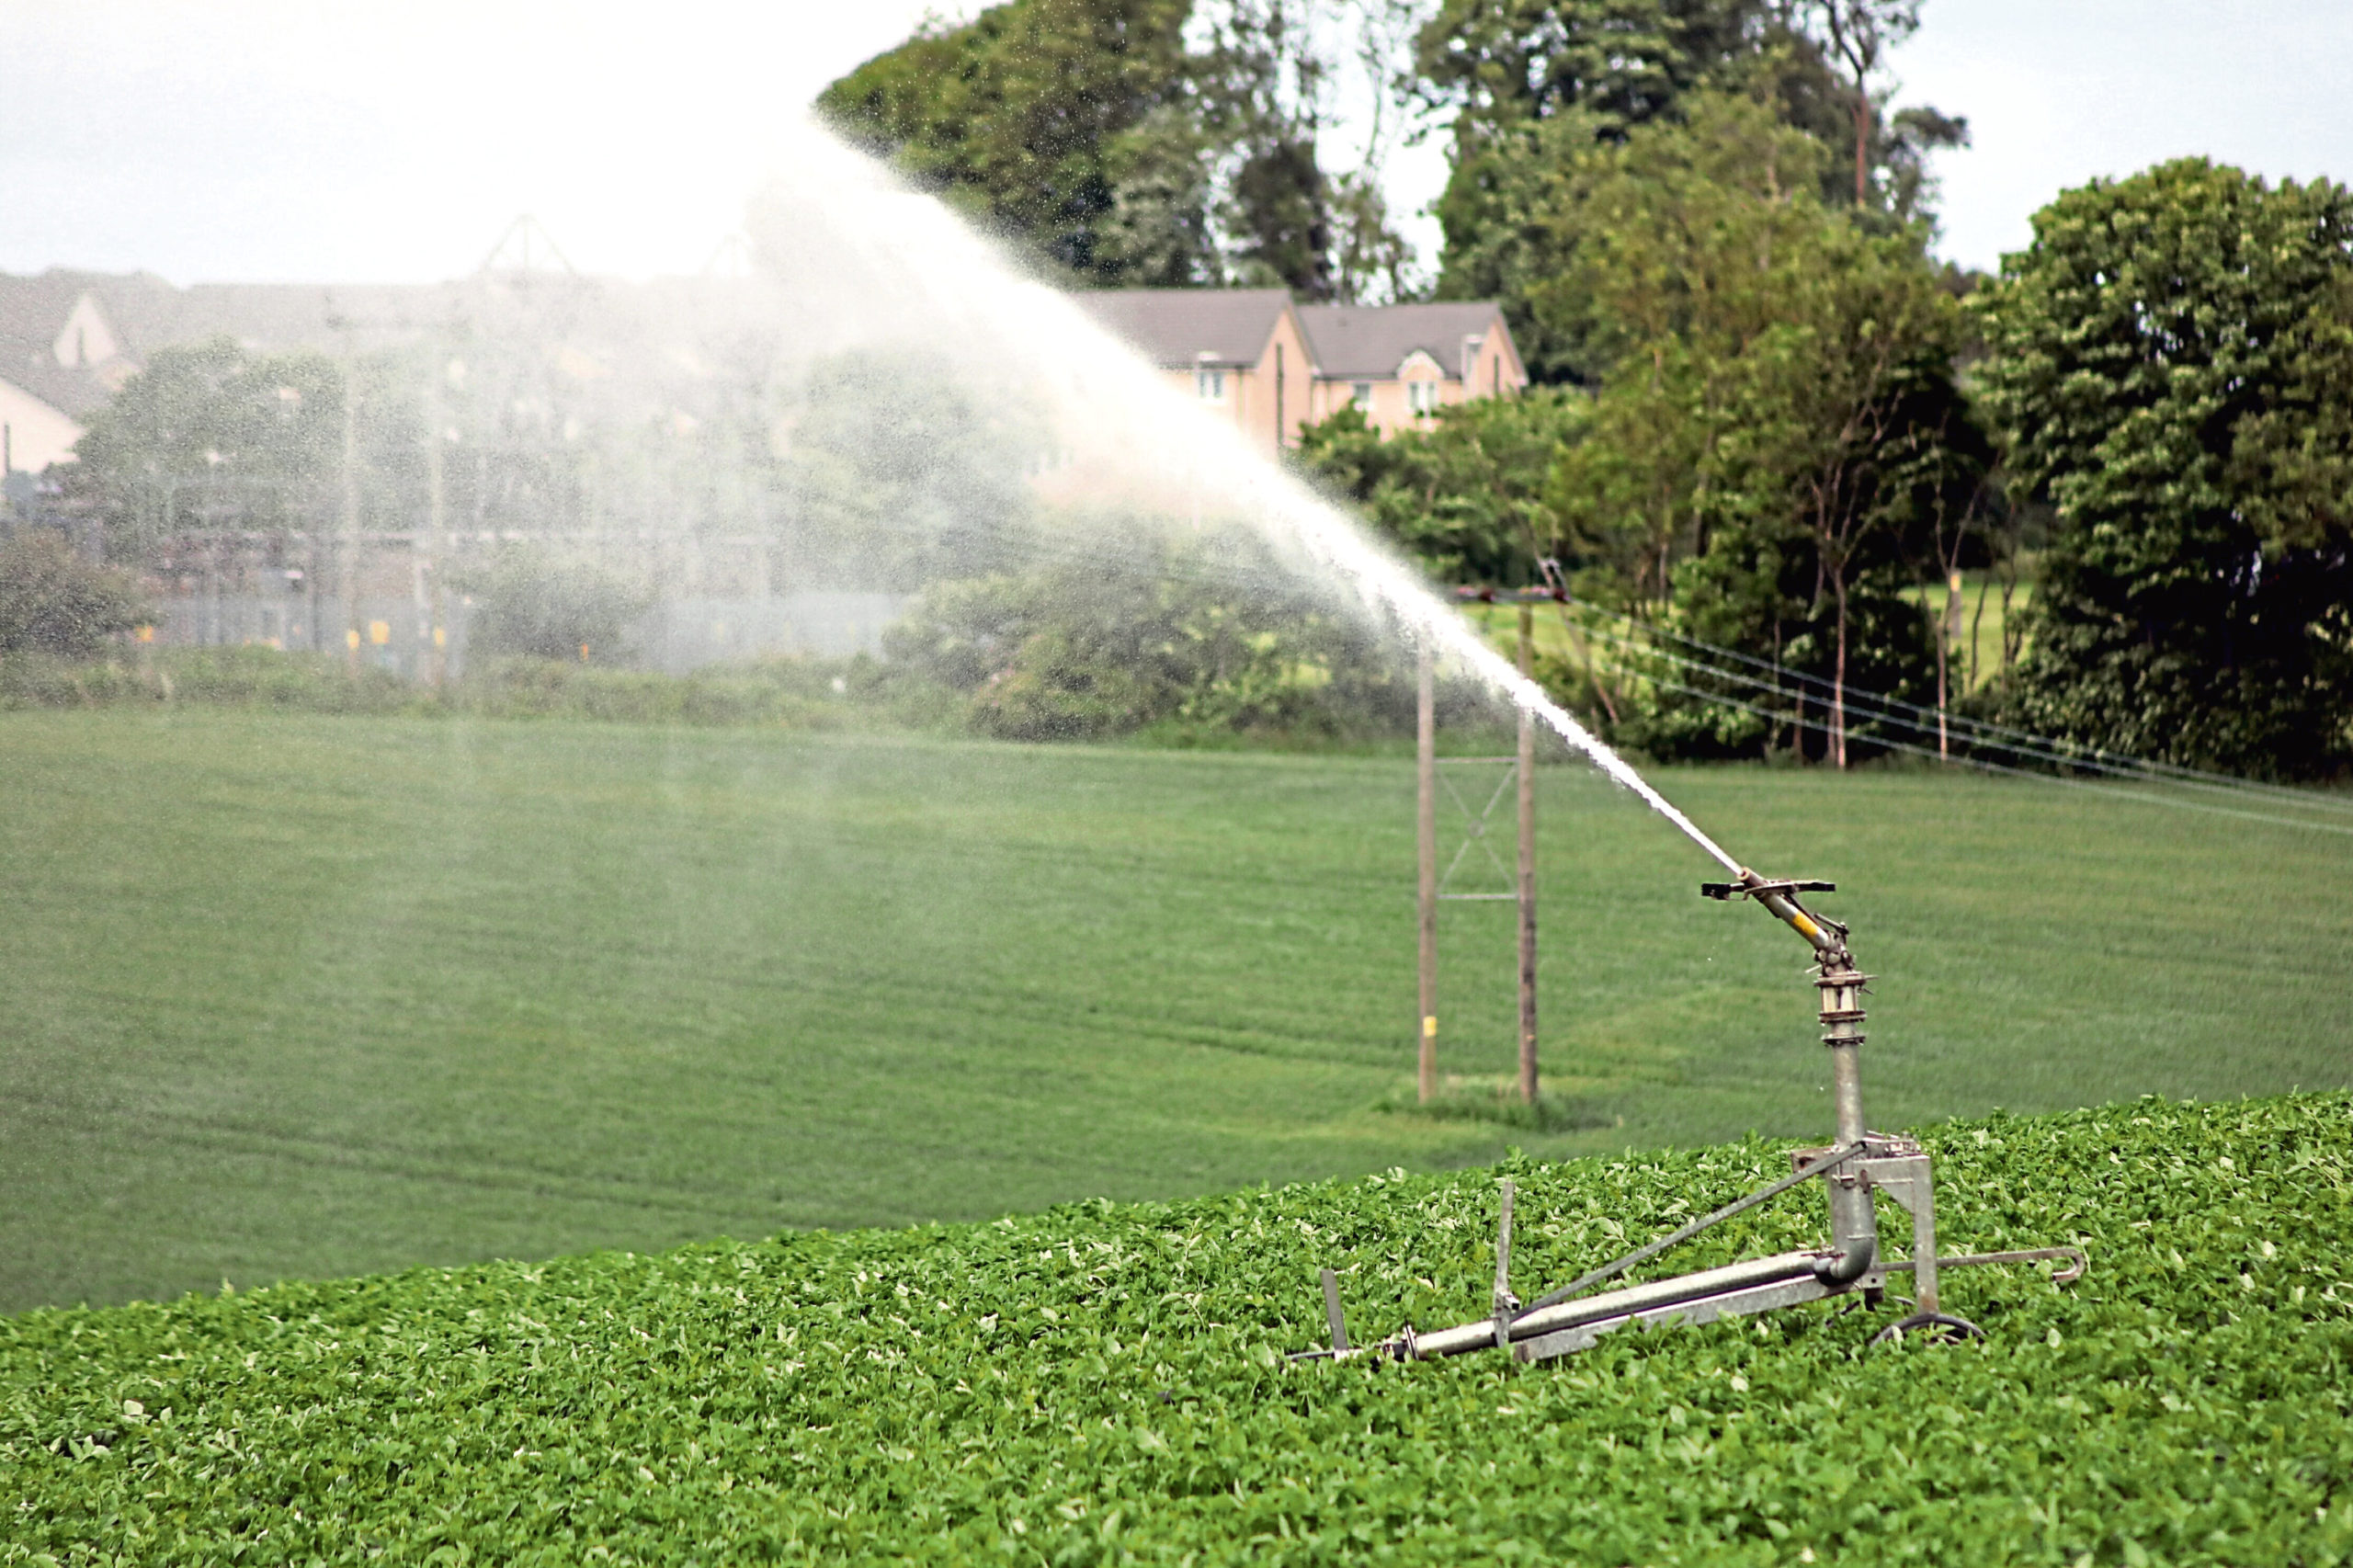 NFUS is urging growers to only irrigate their crops when it is absolutely necessary.